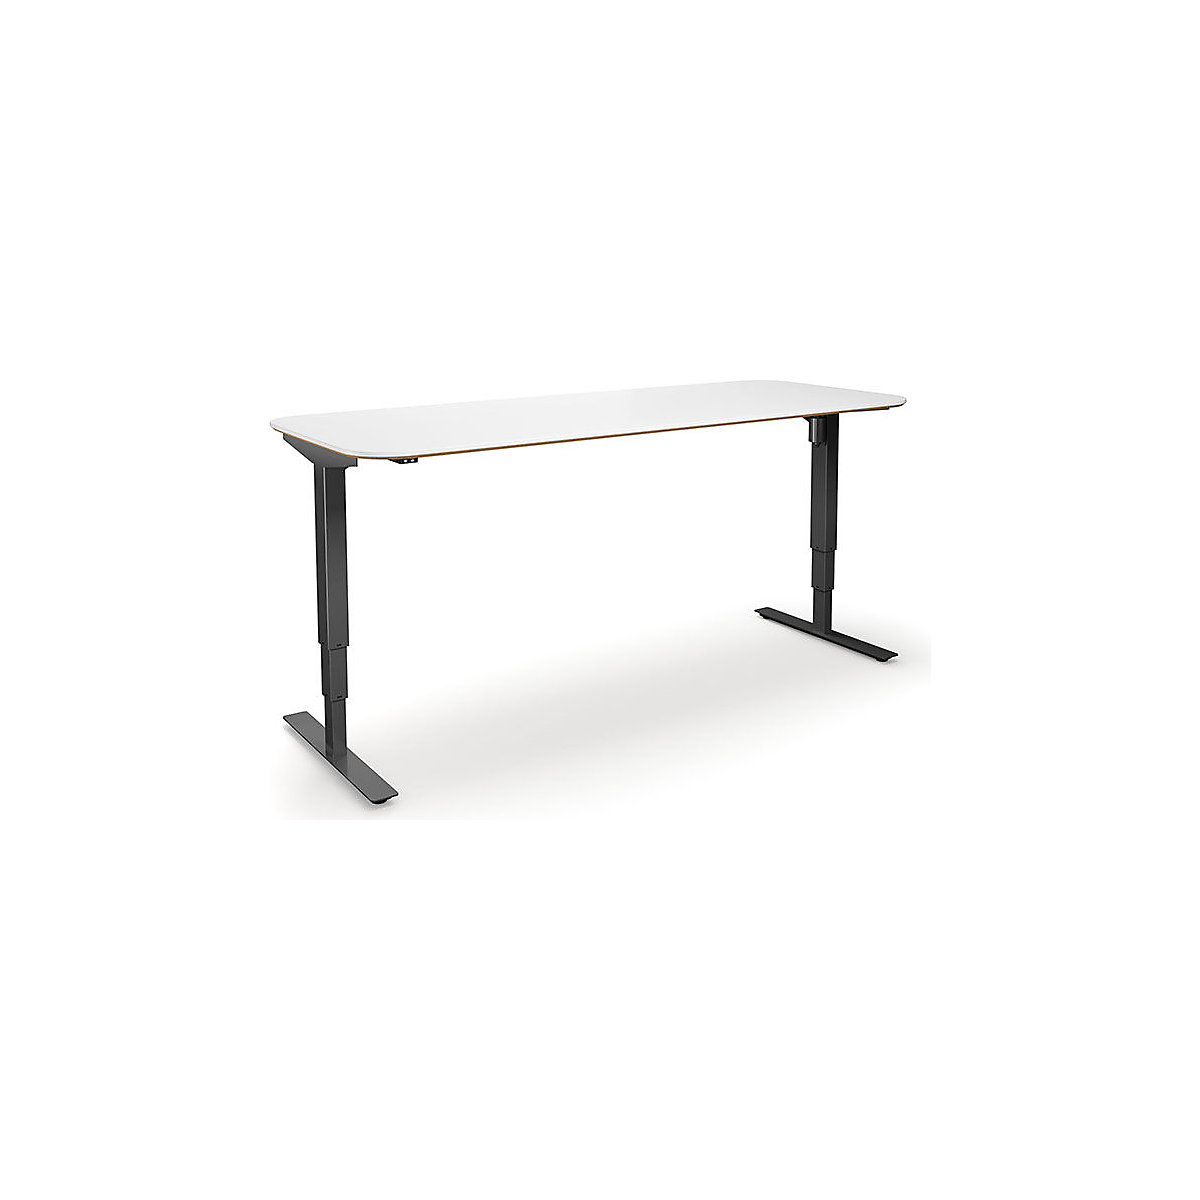 Atlanta Trend desk, electrically height adjustable, straight, rounded corners, WxD 1800 x 800 mm, white/black-14